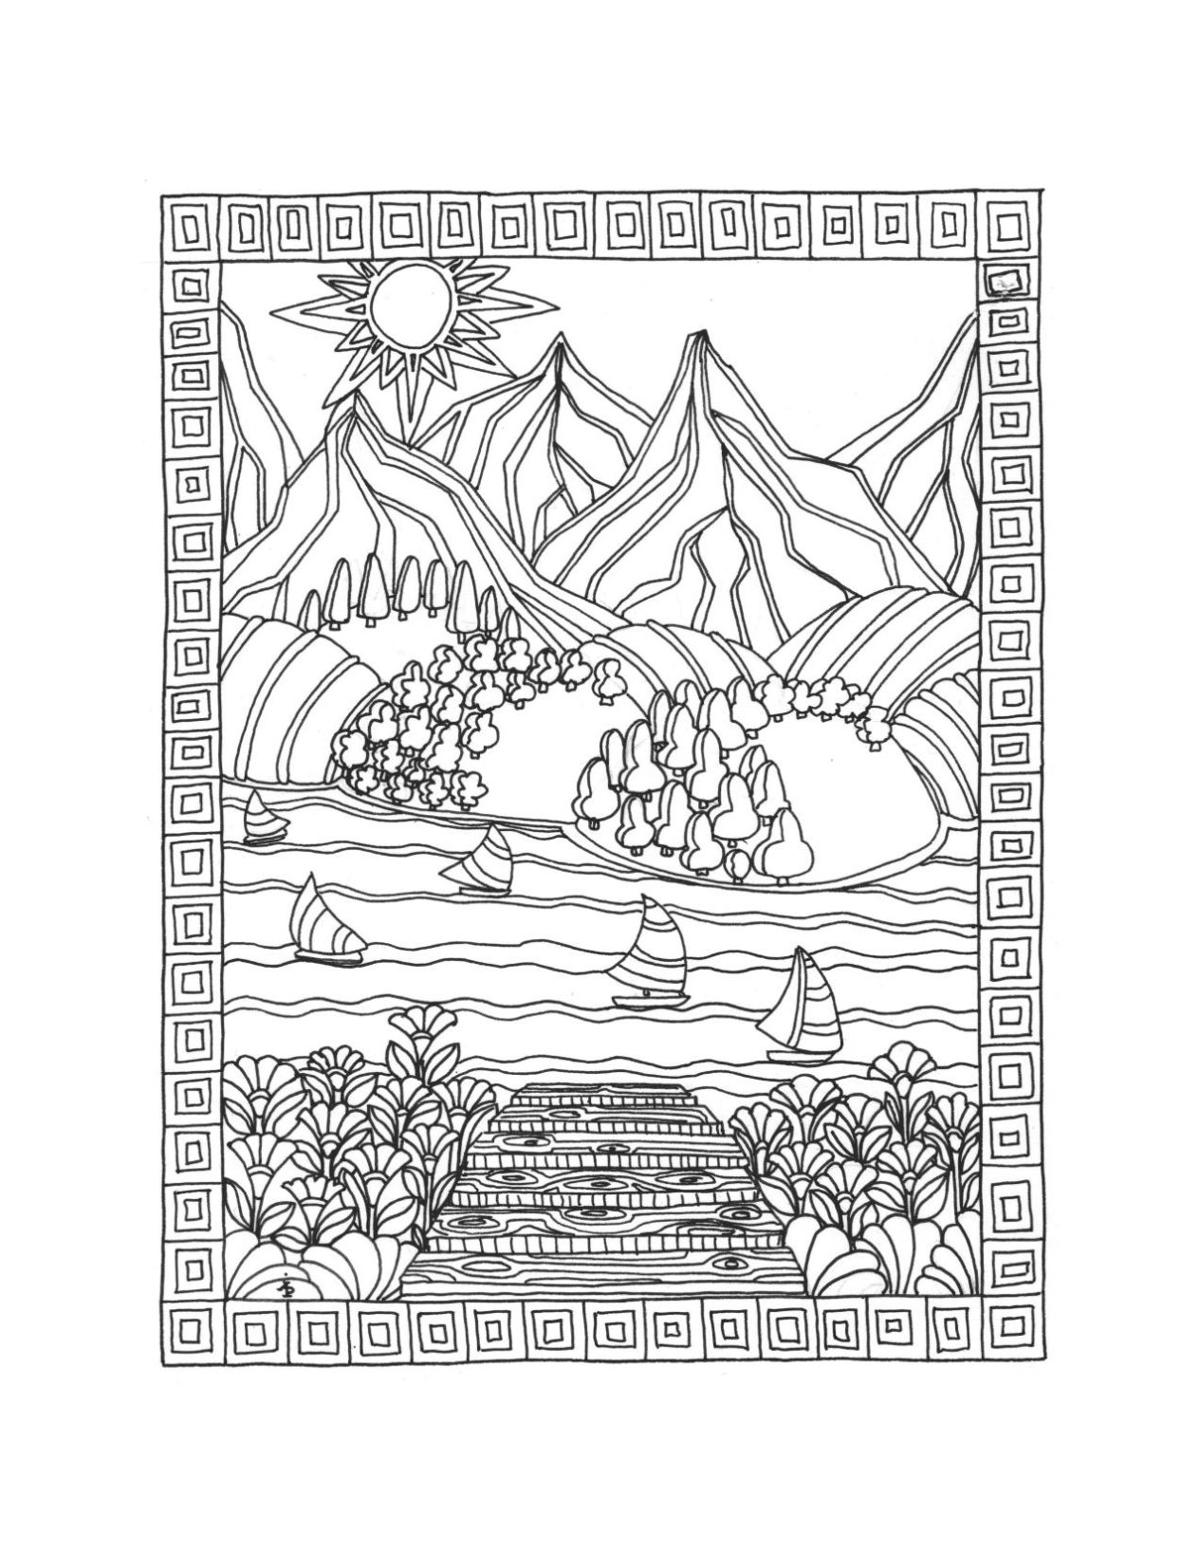 Download Download Your Coloring Pages | | communityhealthmagazine.com